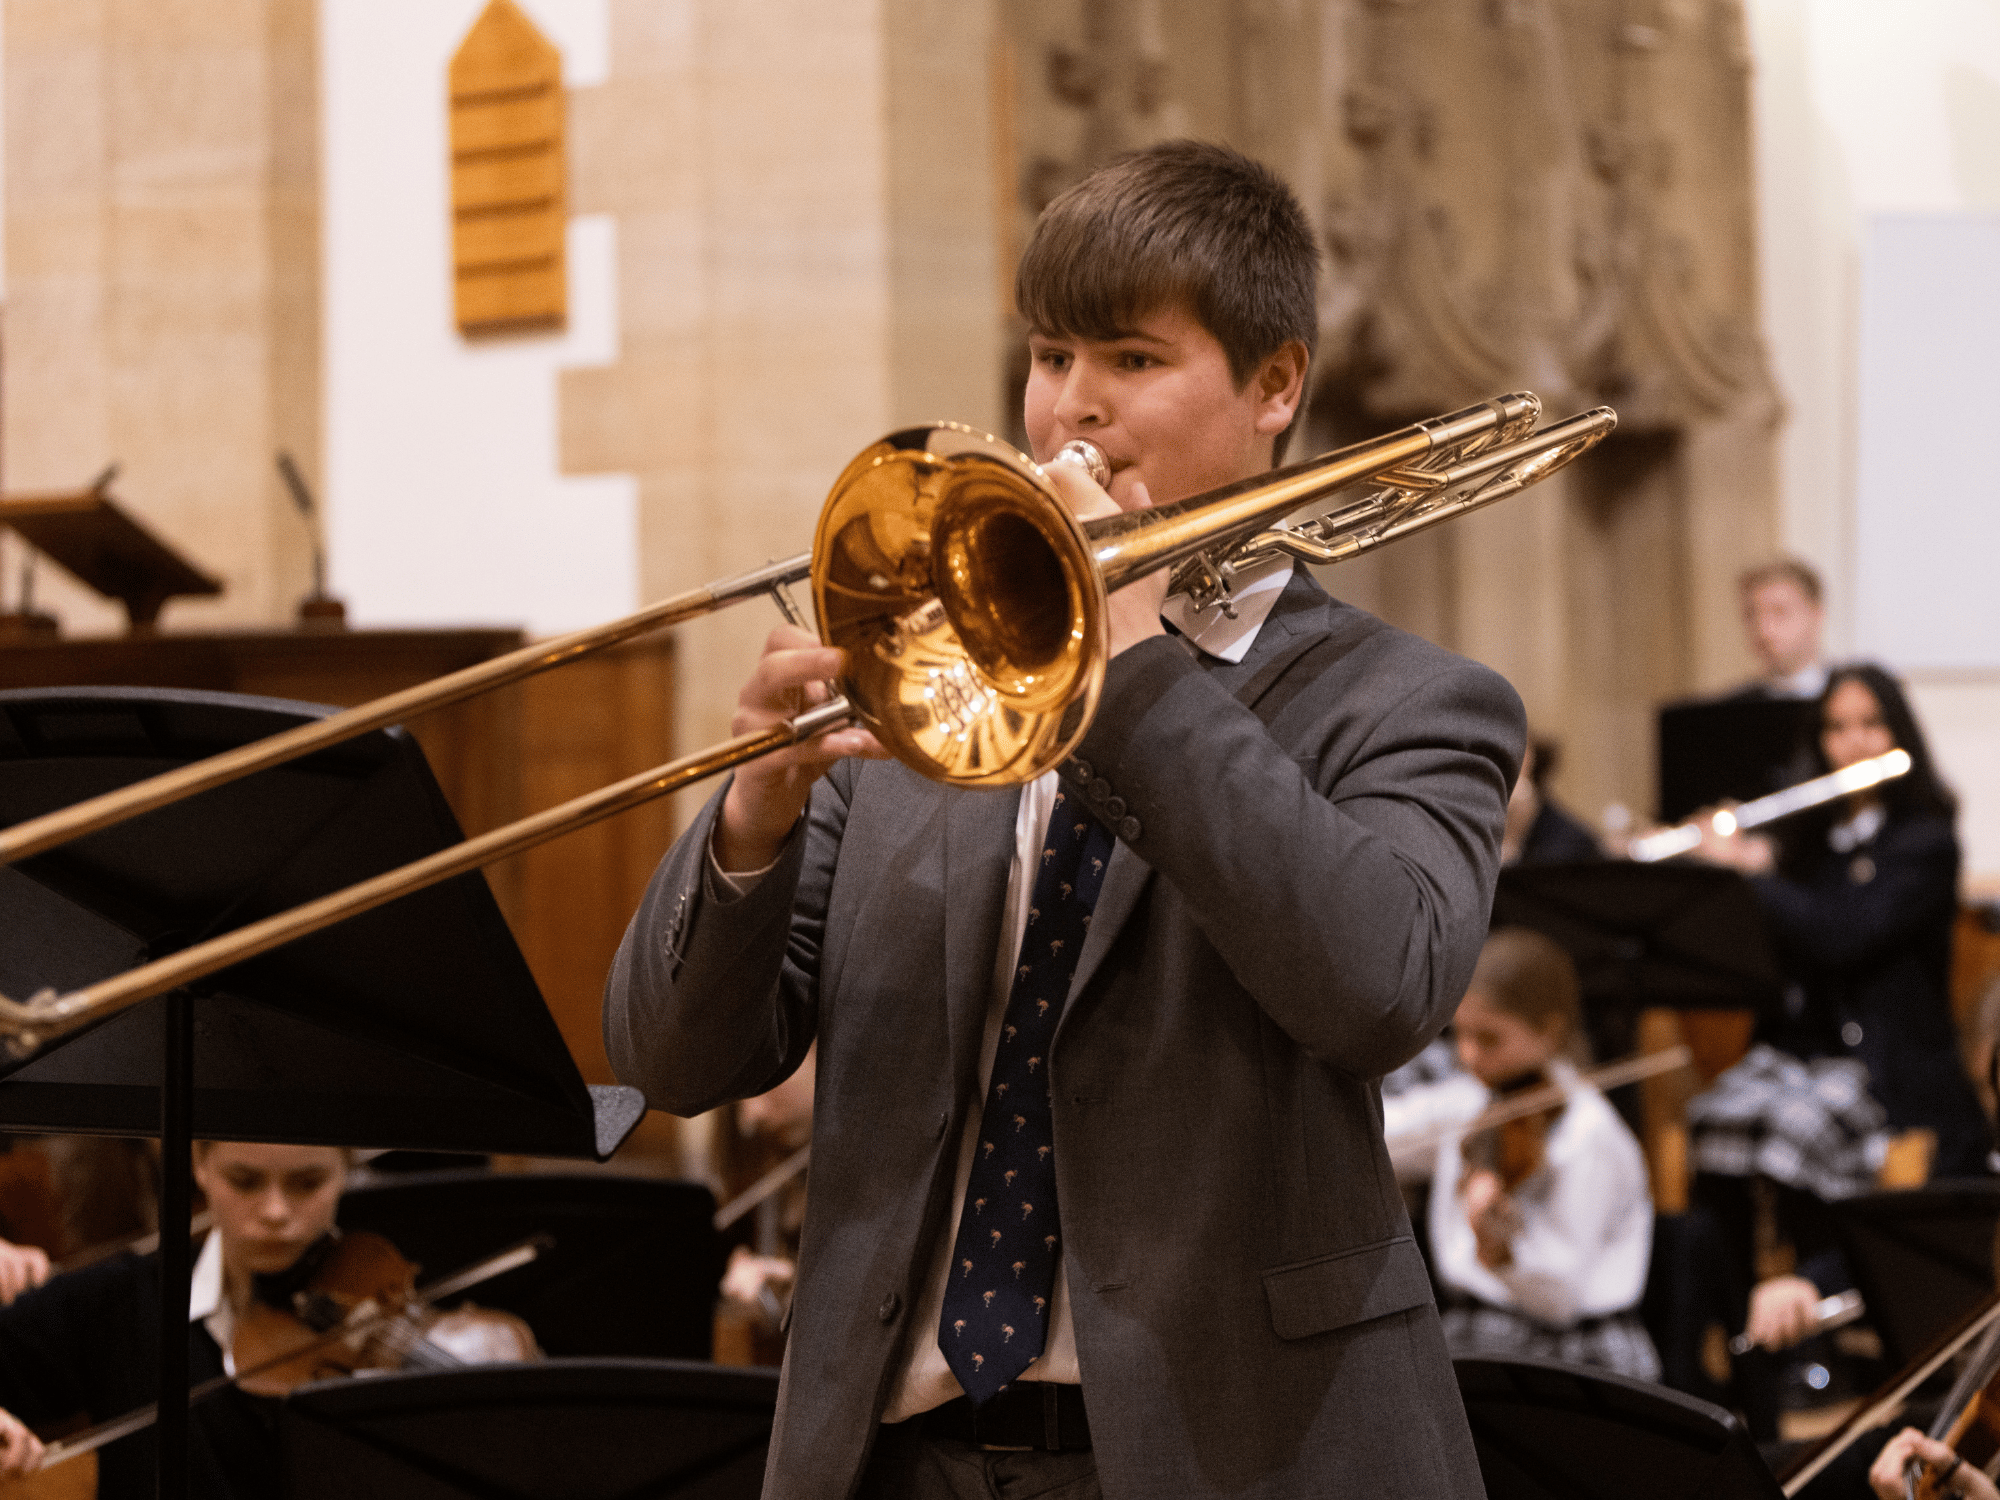 Student plays trombone solo with orchestra